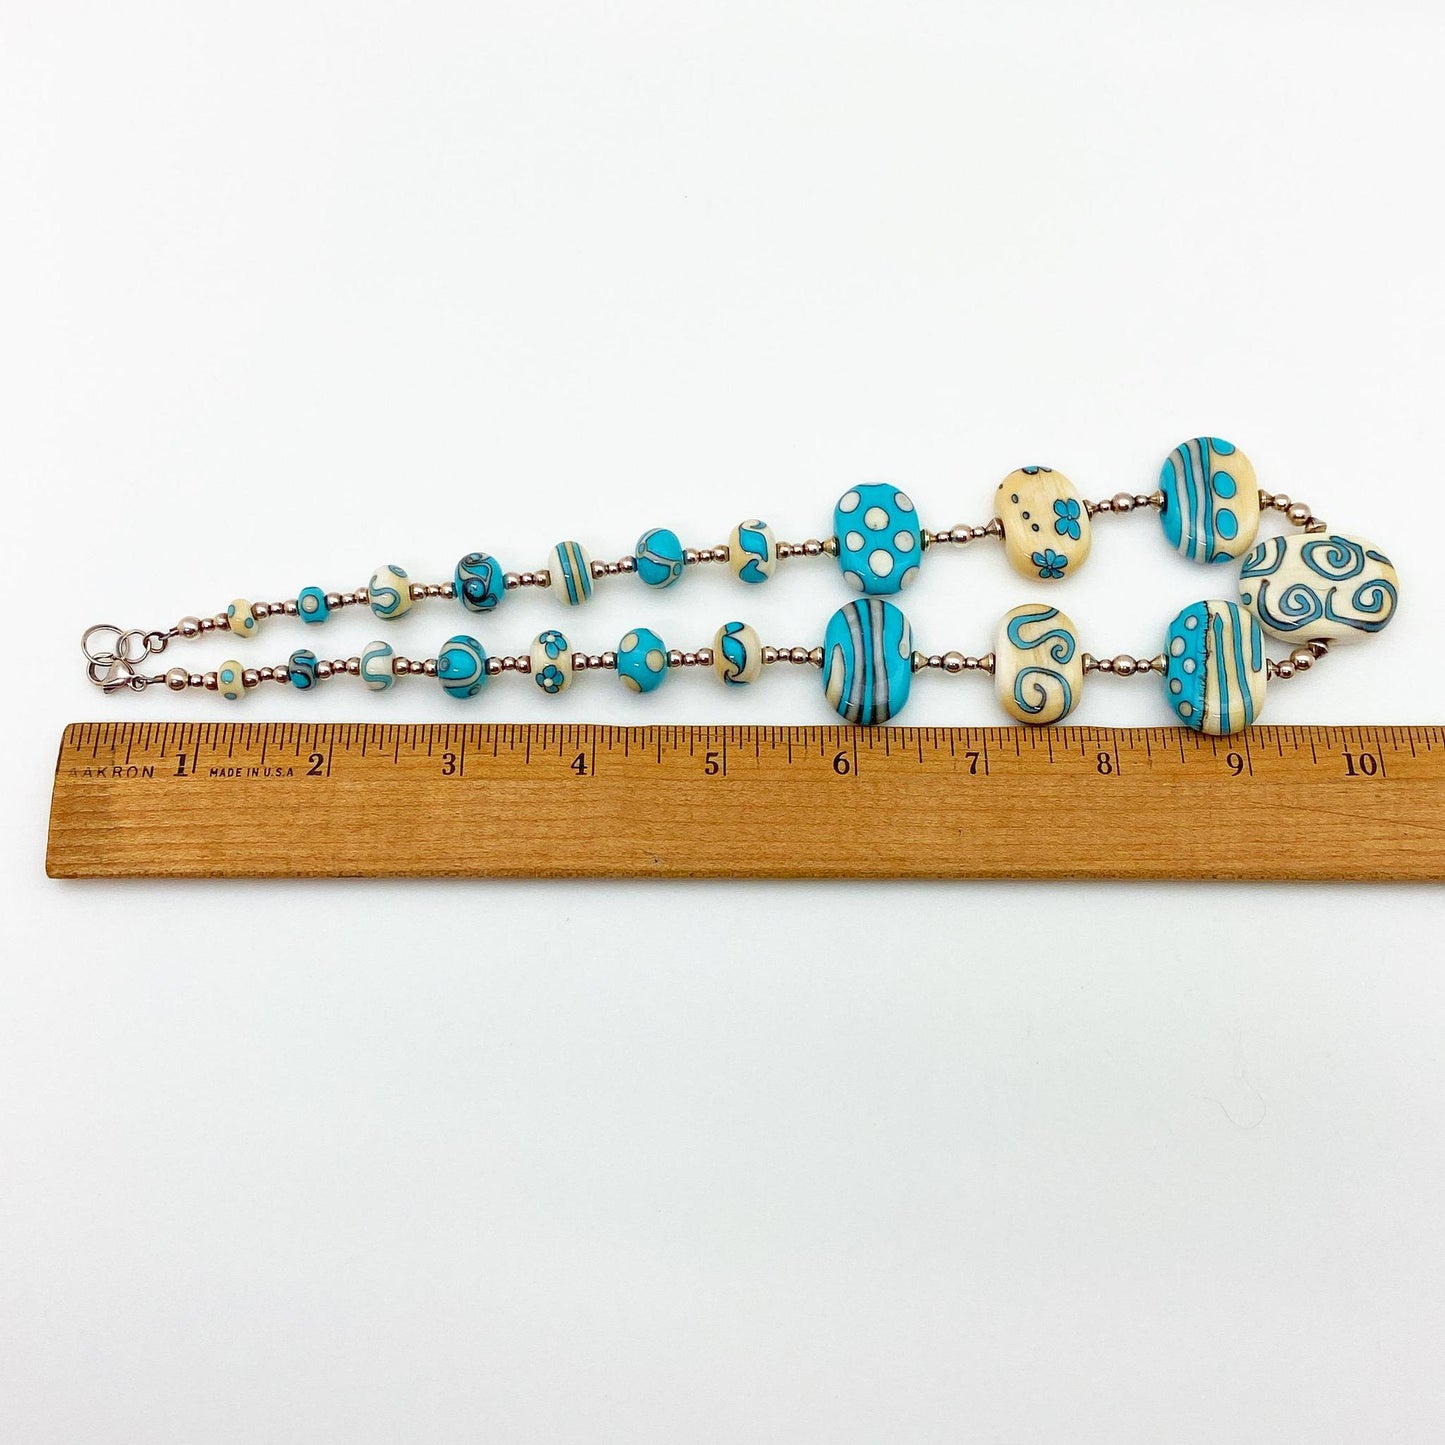 Necklace - Turquoise & White - Original Glass Beads